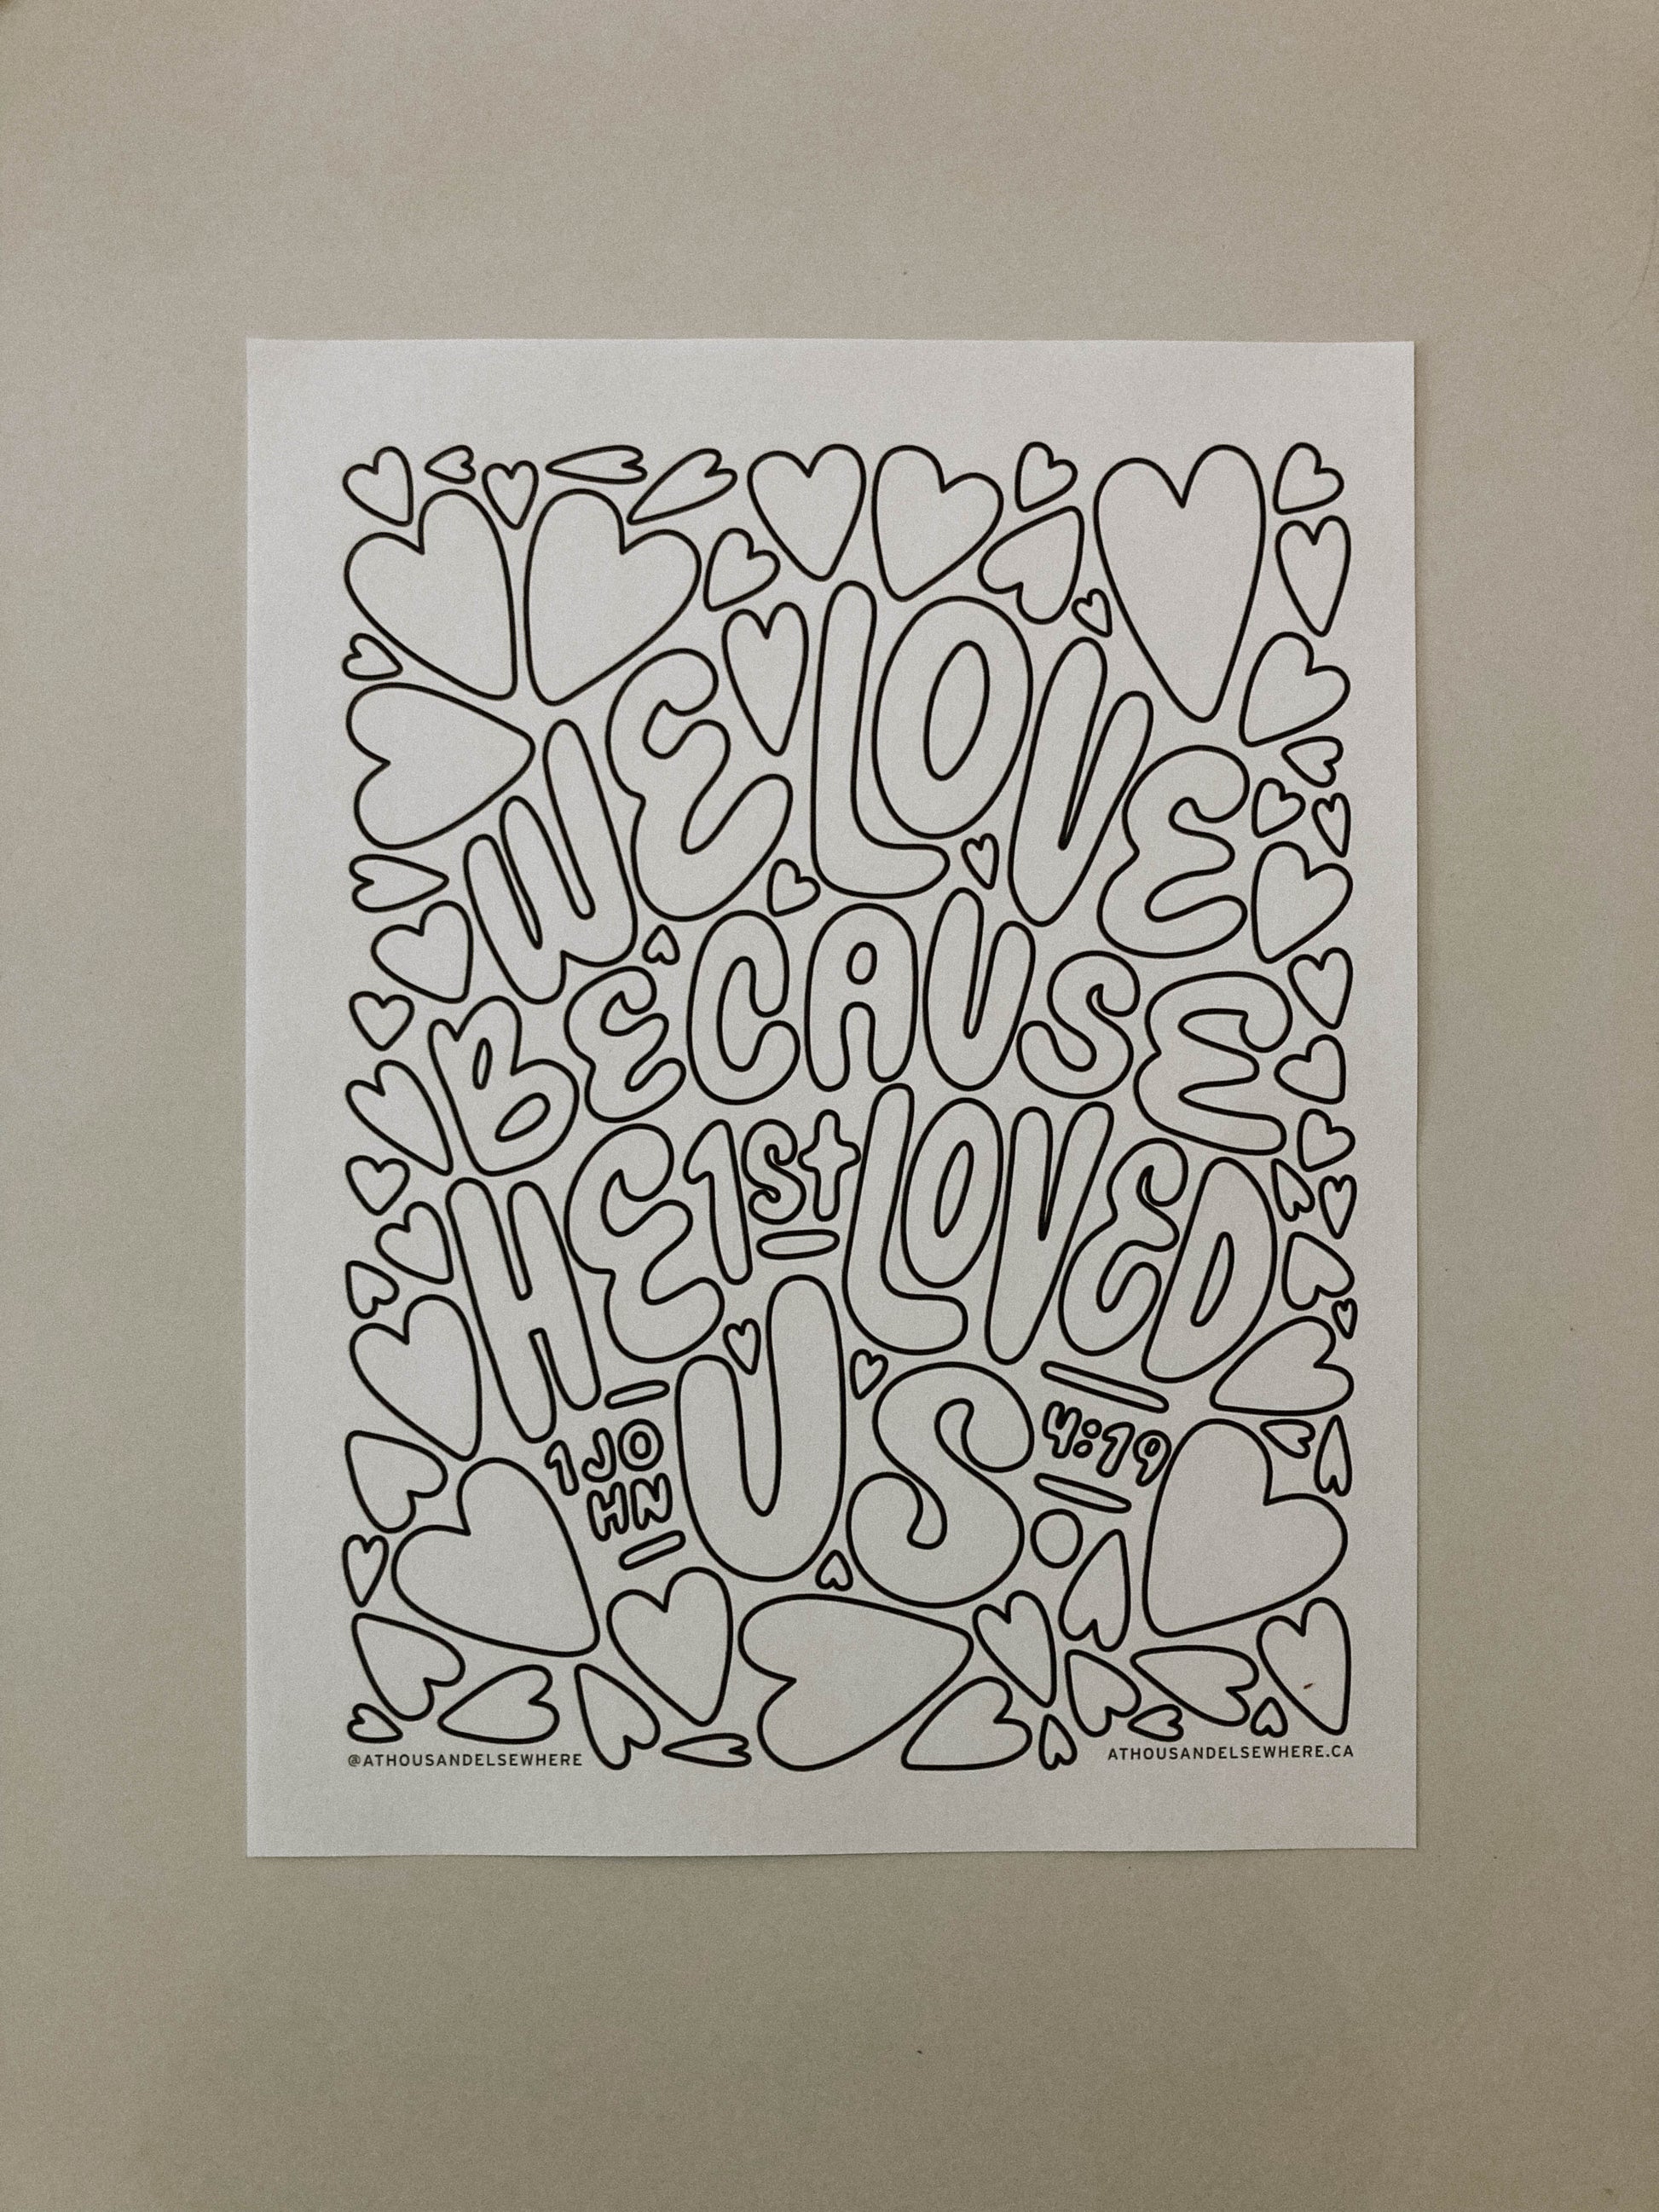 Colouring Page - We Love, 1 John 4:19 - A Thousand Elsewhere